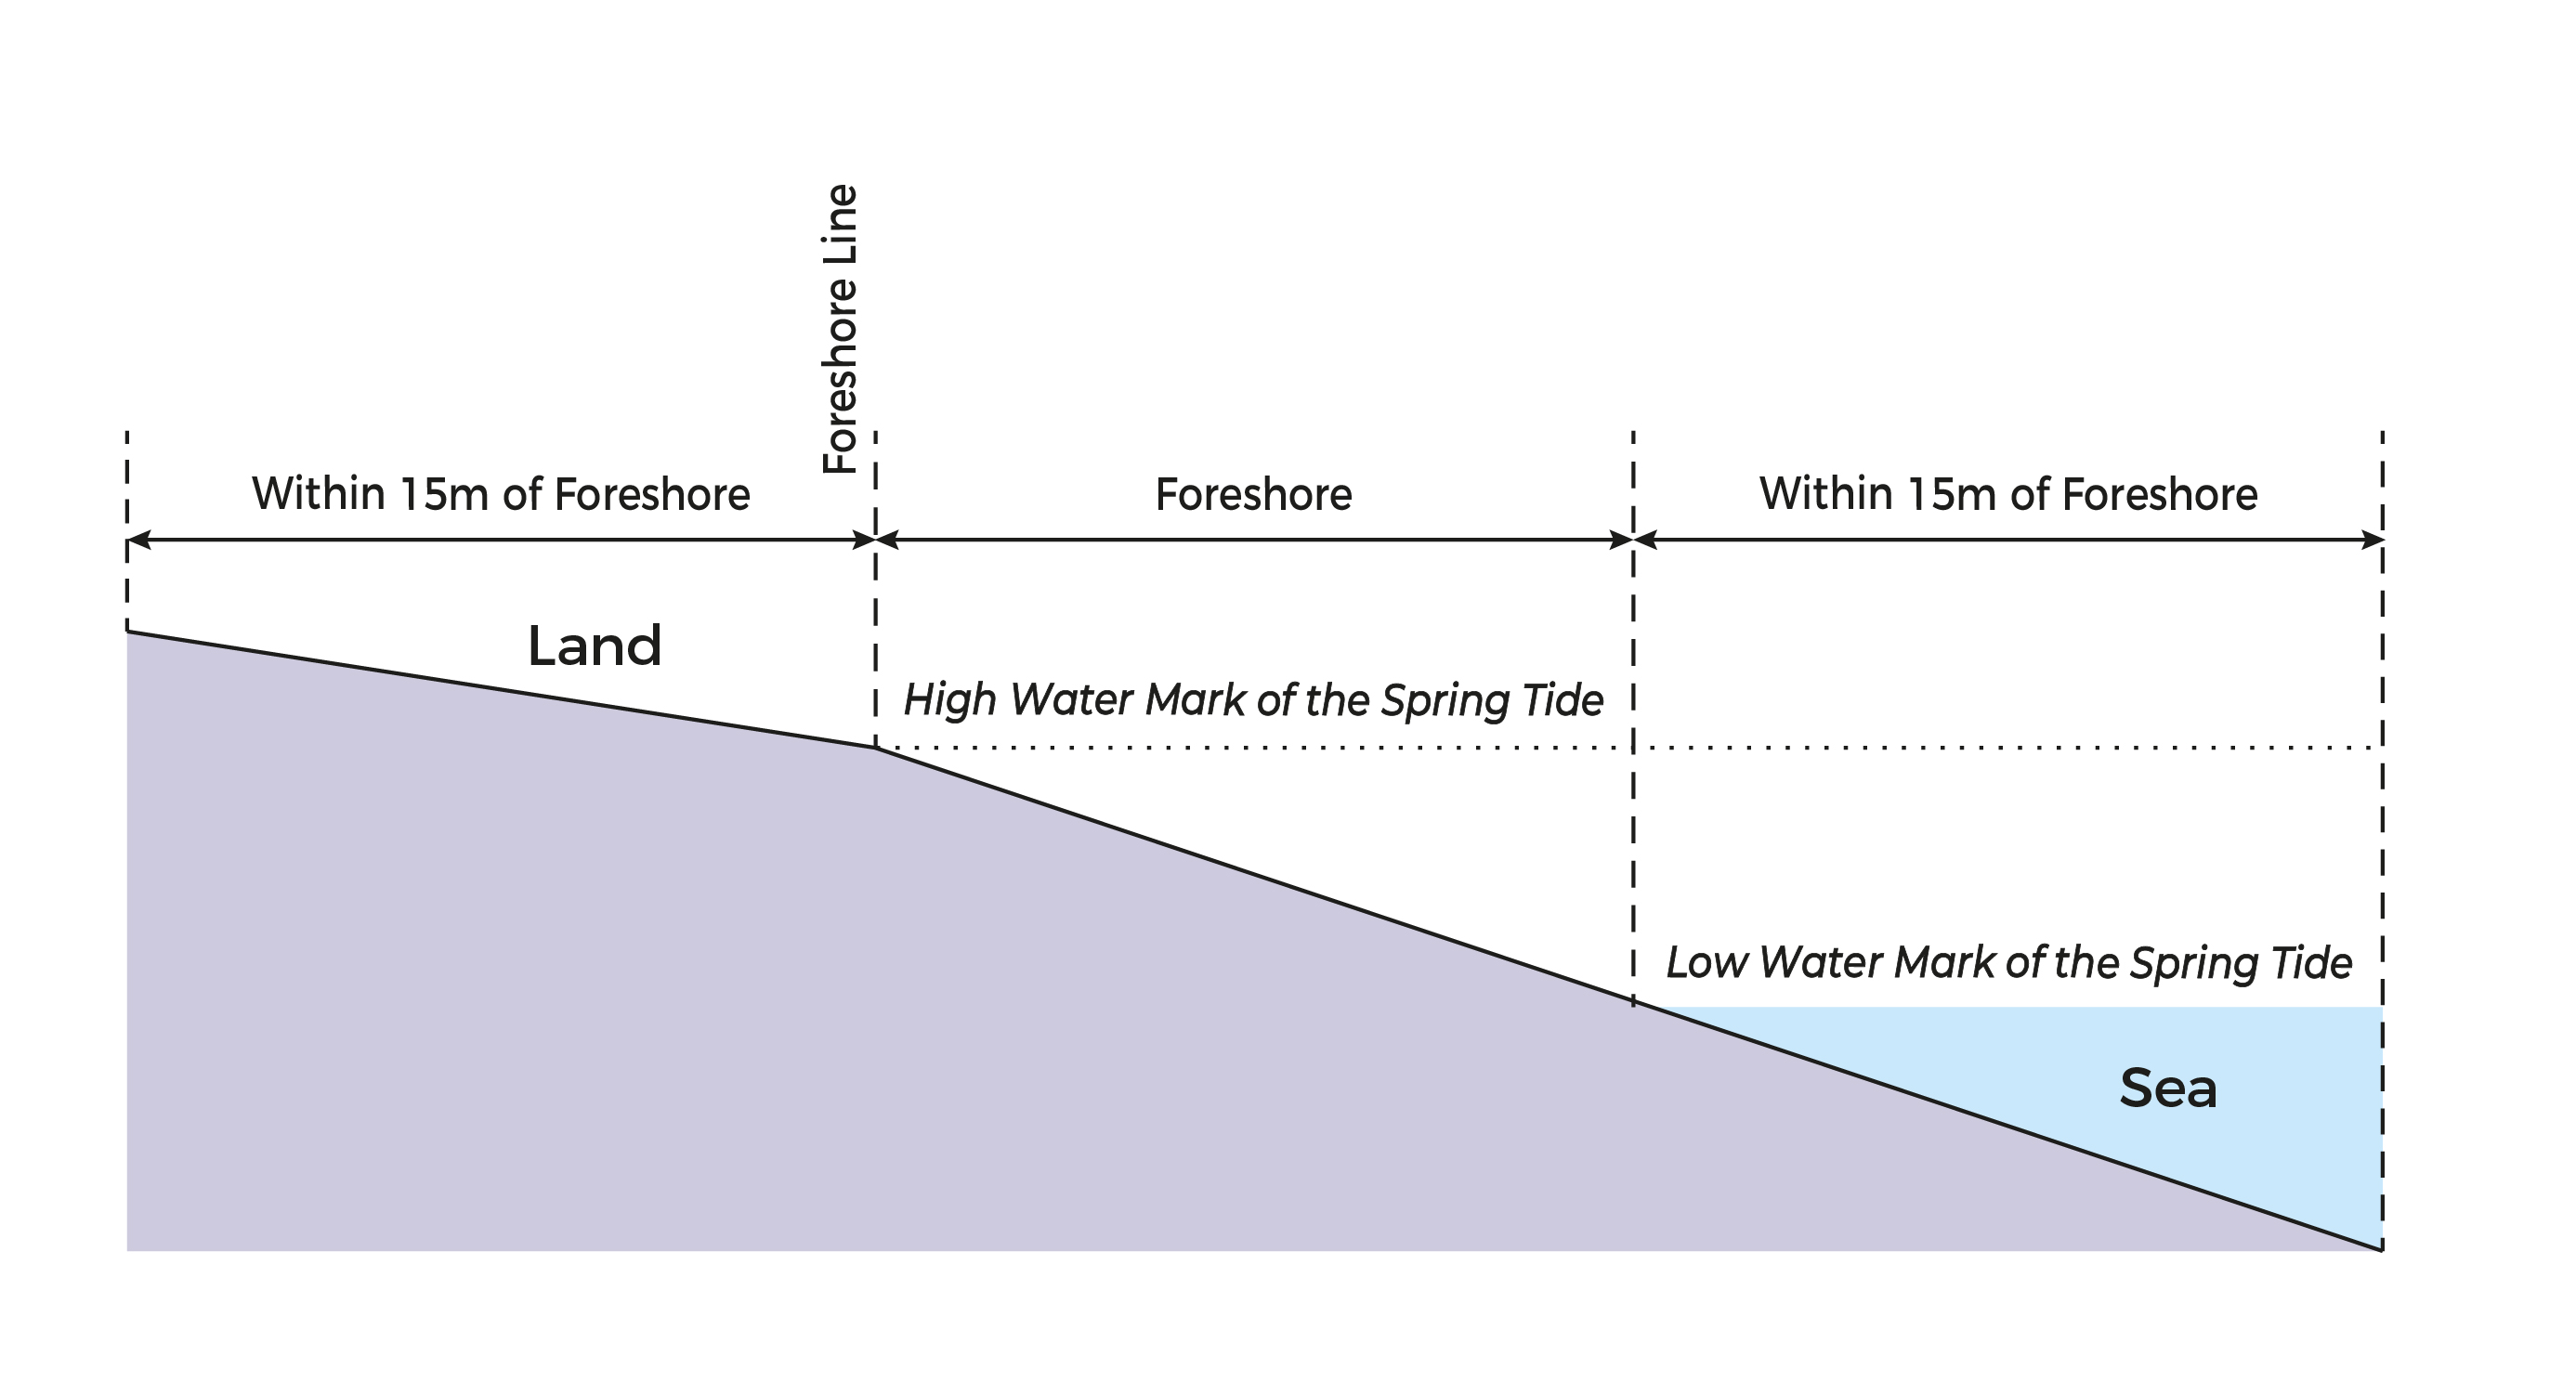 The foreshore line as defined by the high water mark of the Spring Tide